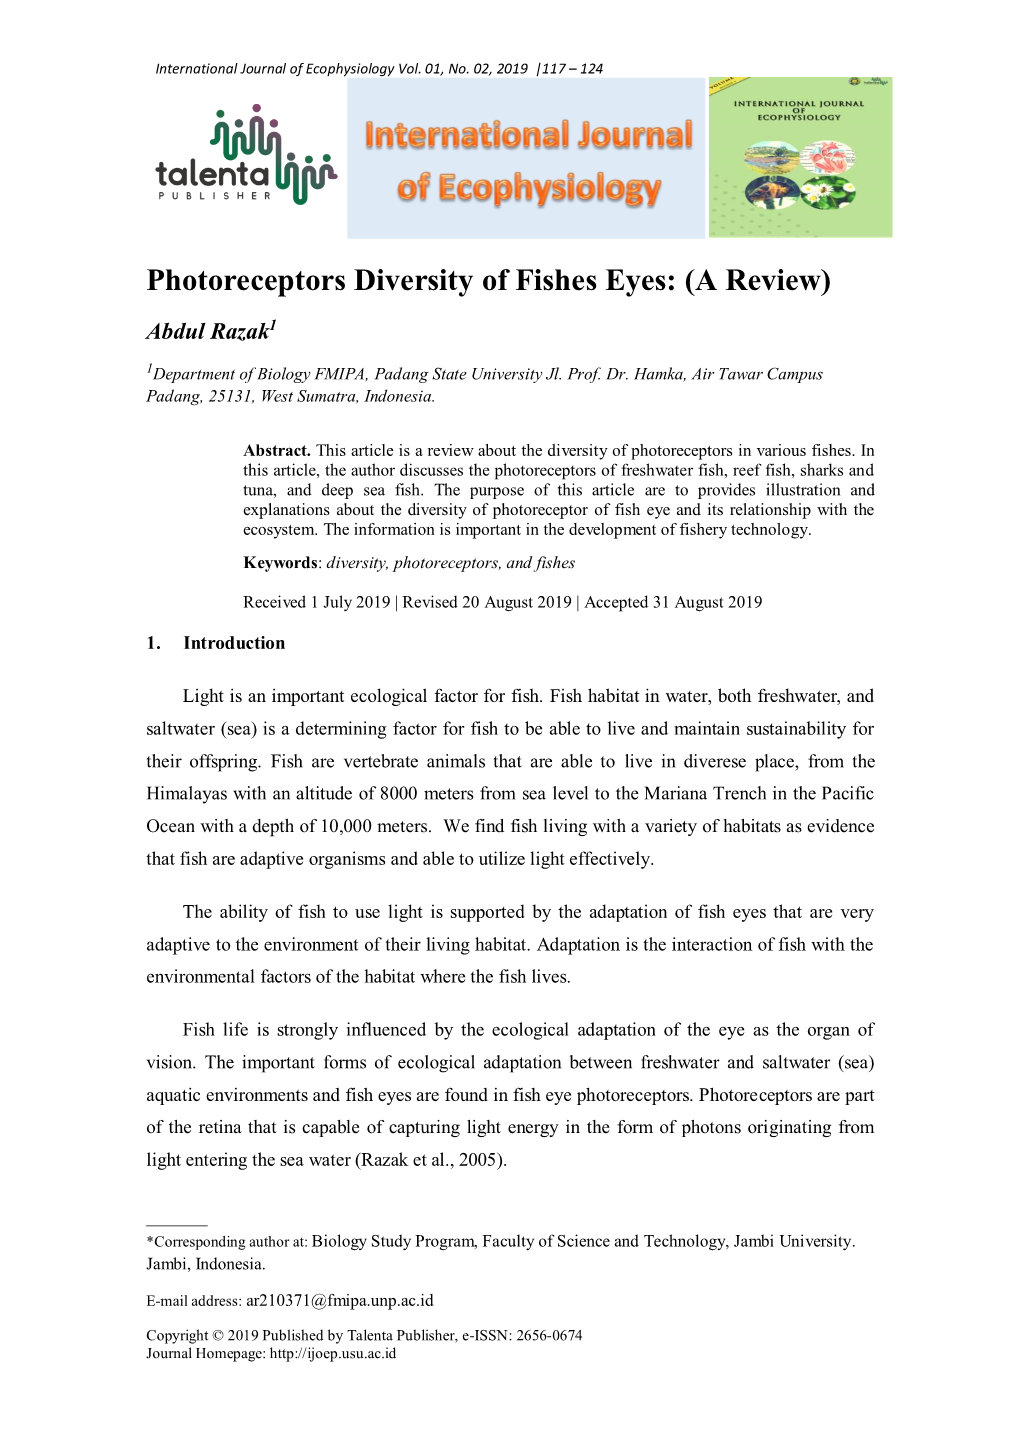 Photoreceptors Diversity of Fishes Eyes: (A Review)